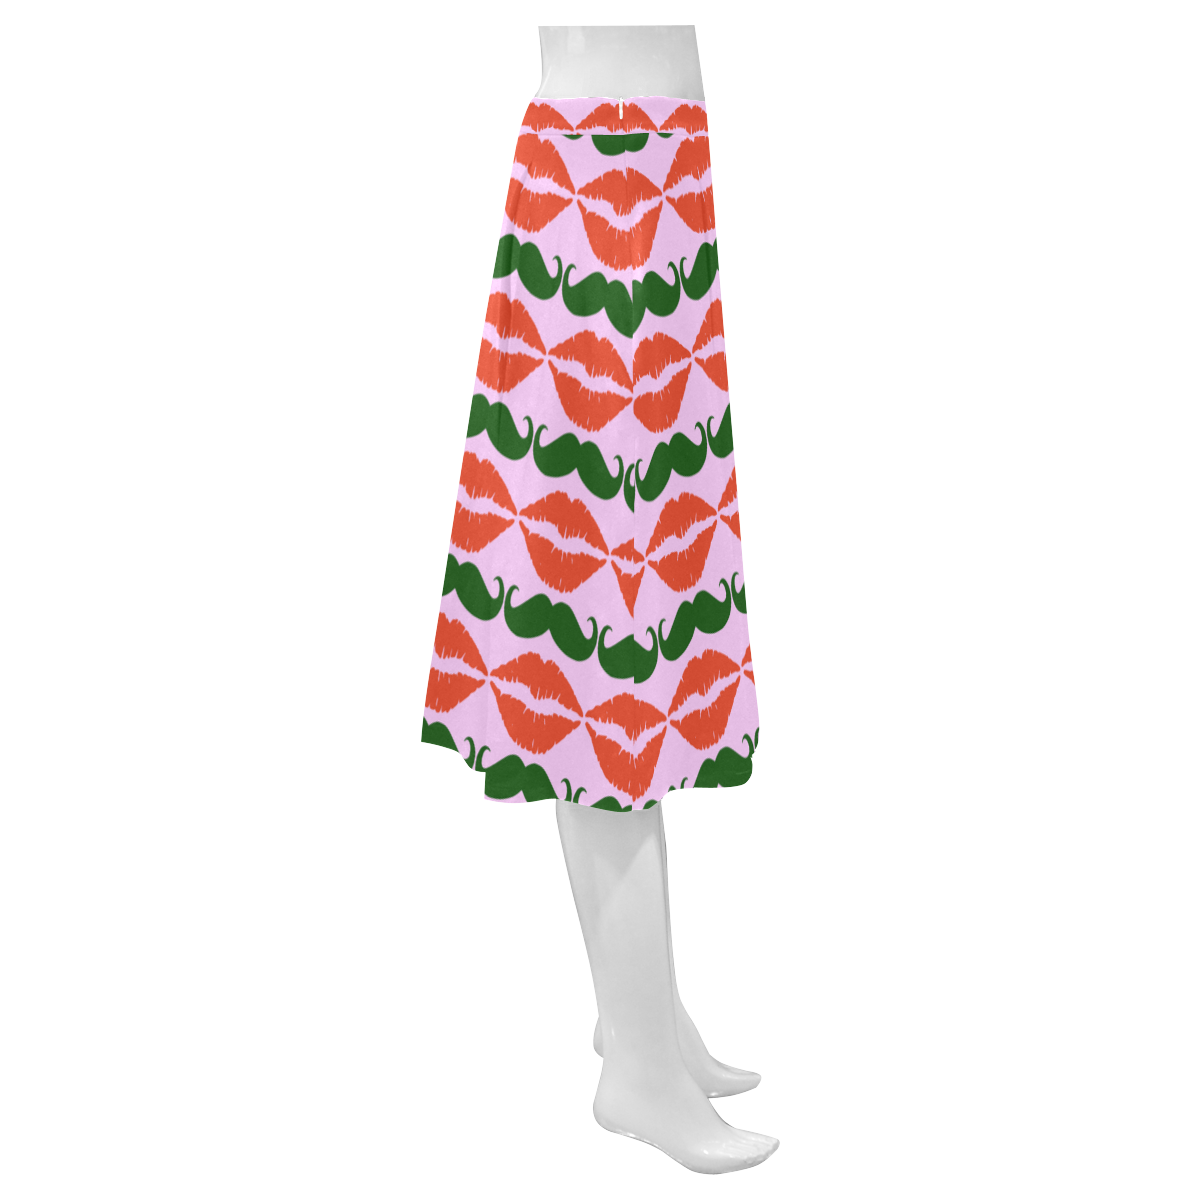 Red and Green Hipster Mustache and Lips Mnemosyne Women's Crepe Skirt (Model D16)